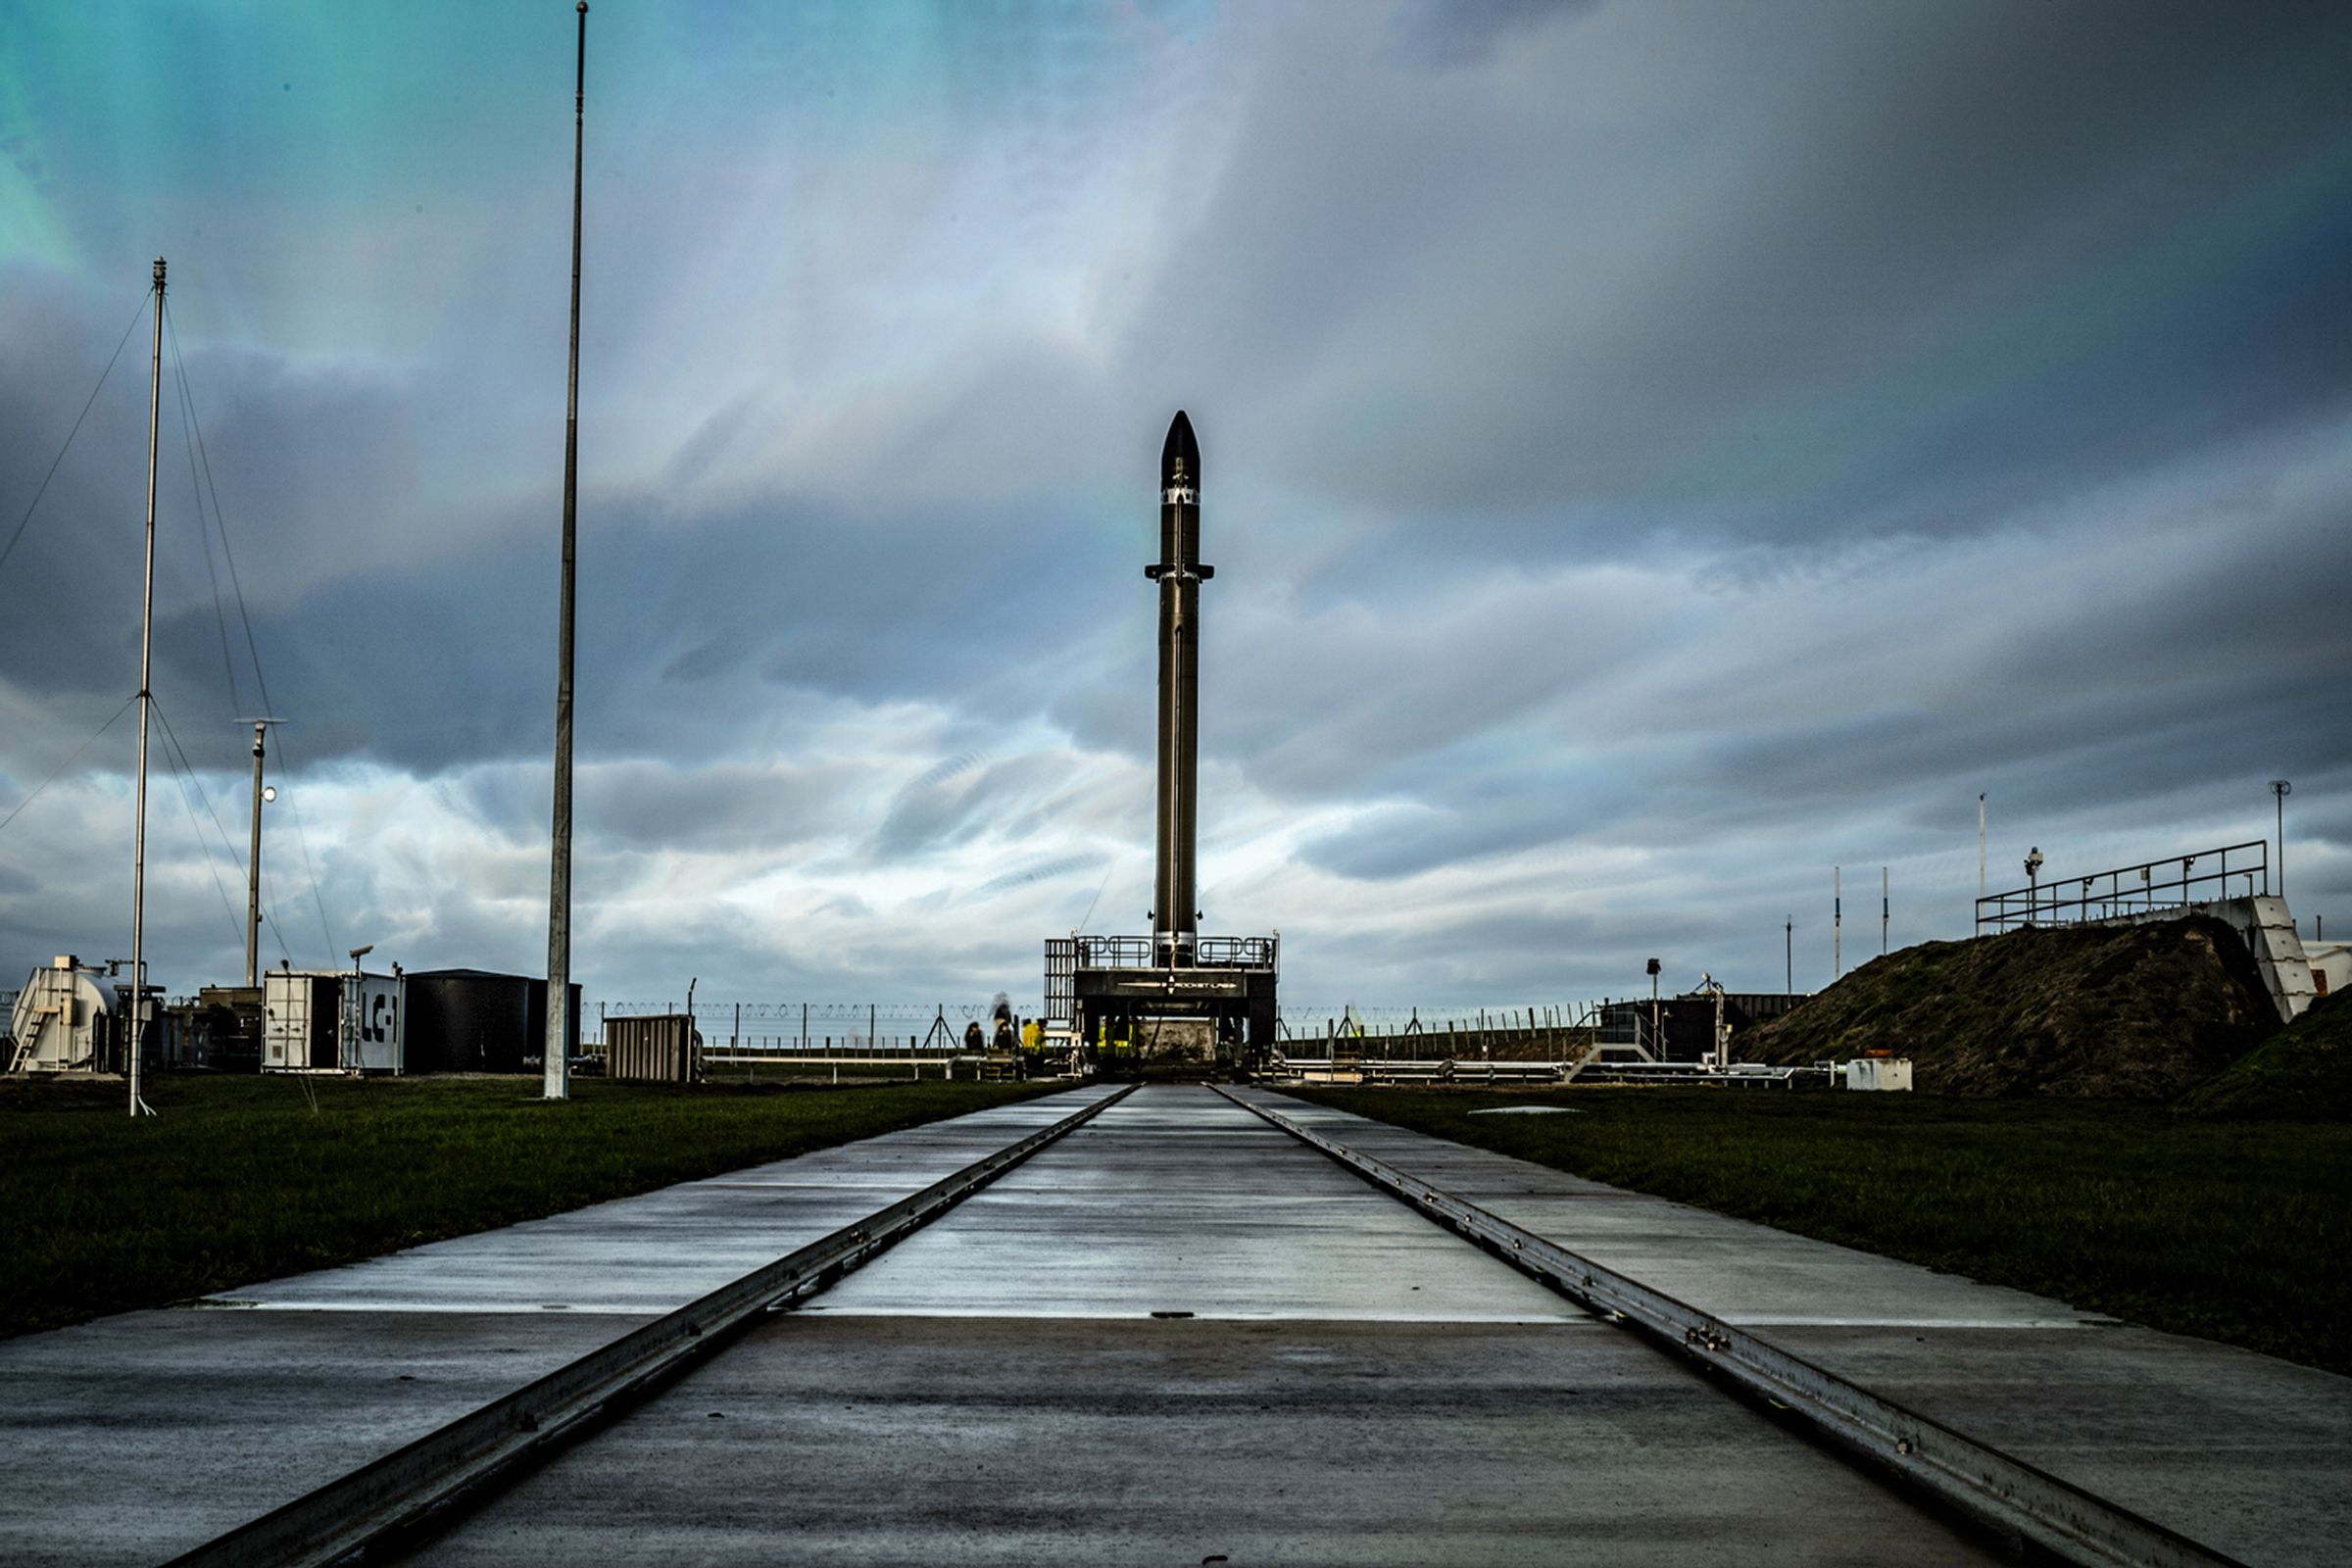 Rocket Lab’s Electron rocket at the company’s New Zealand launch site